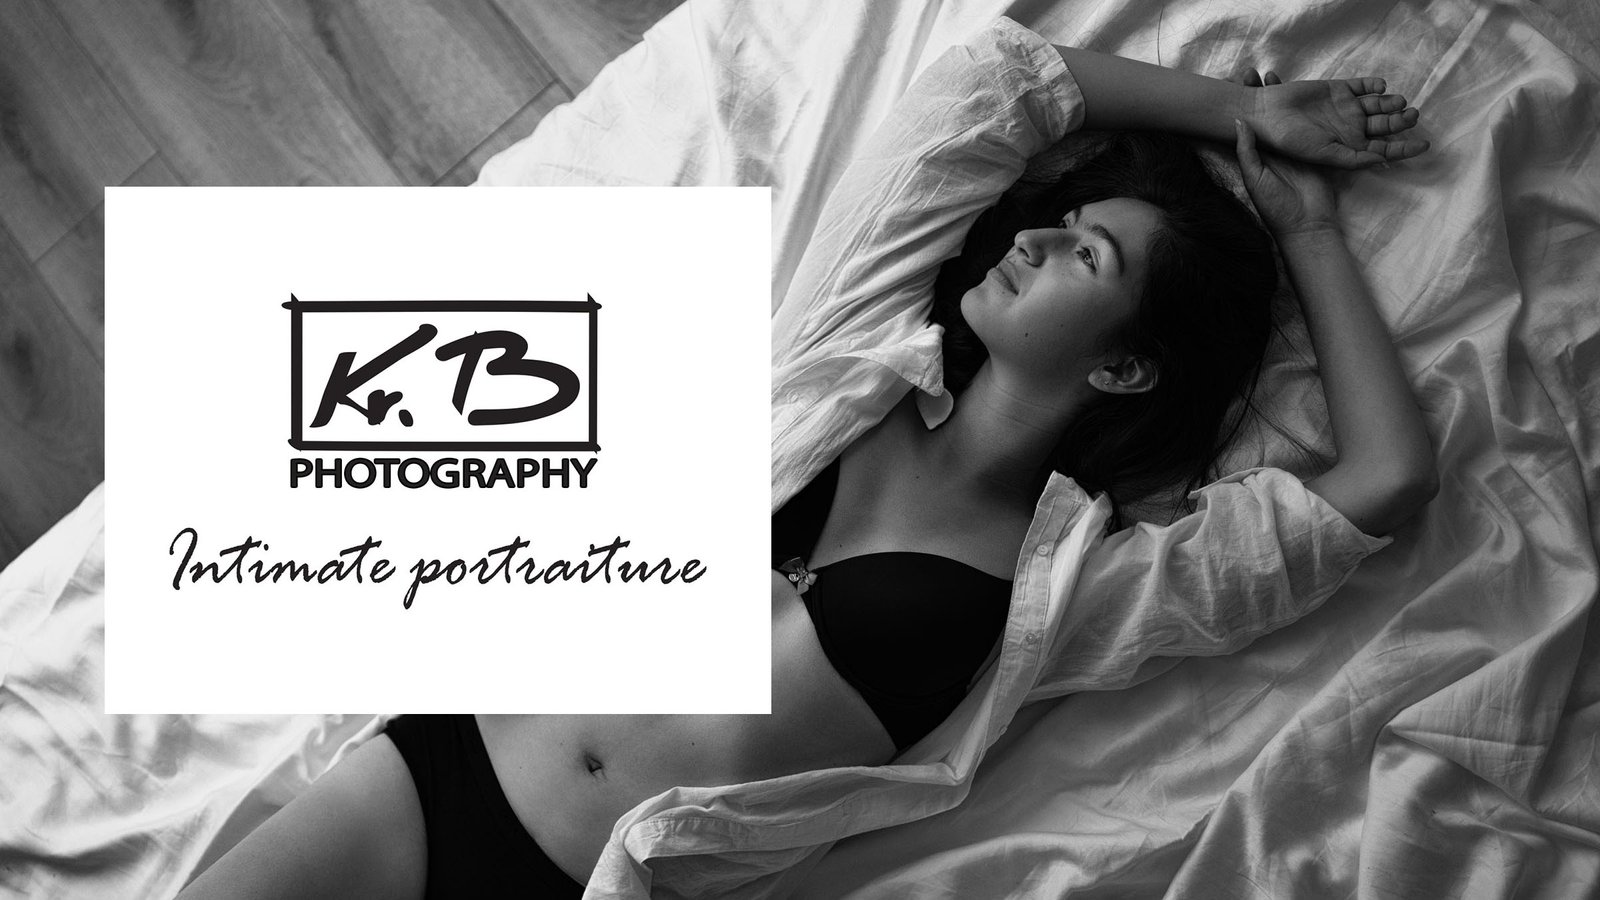 KrB Photography, cover photo 16